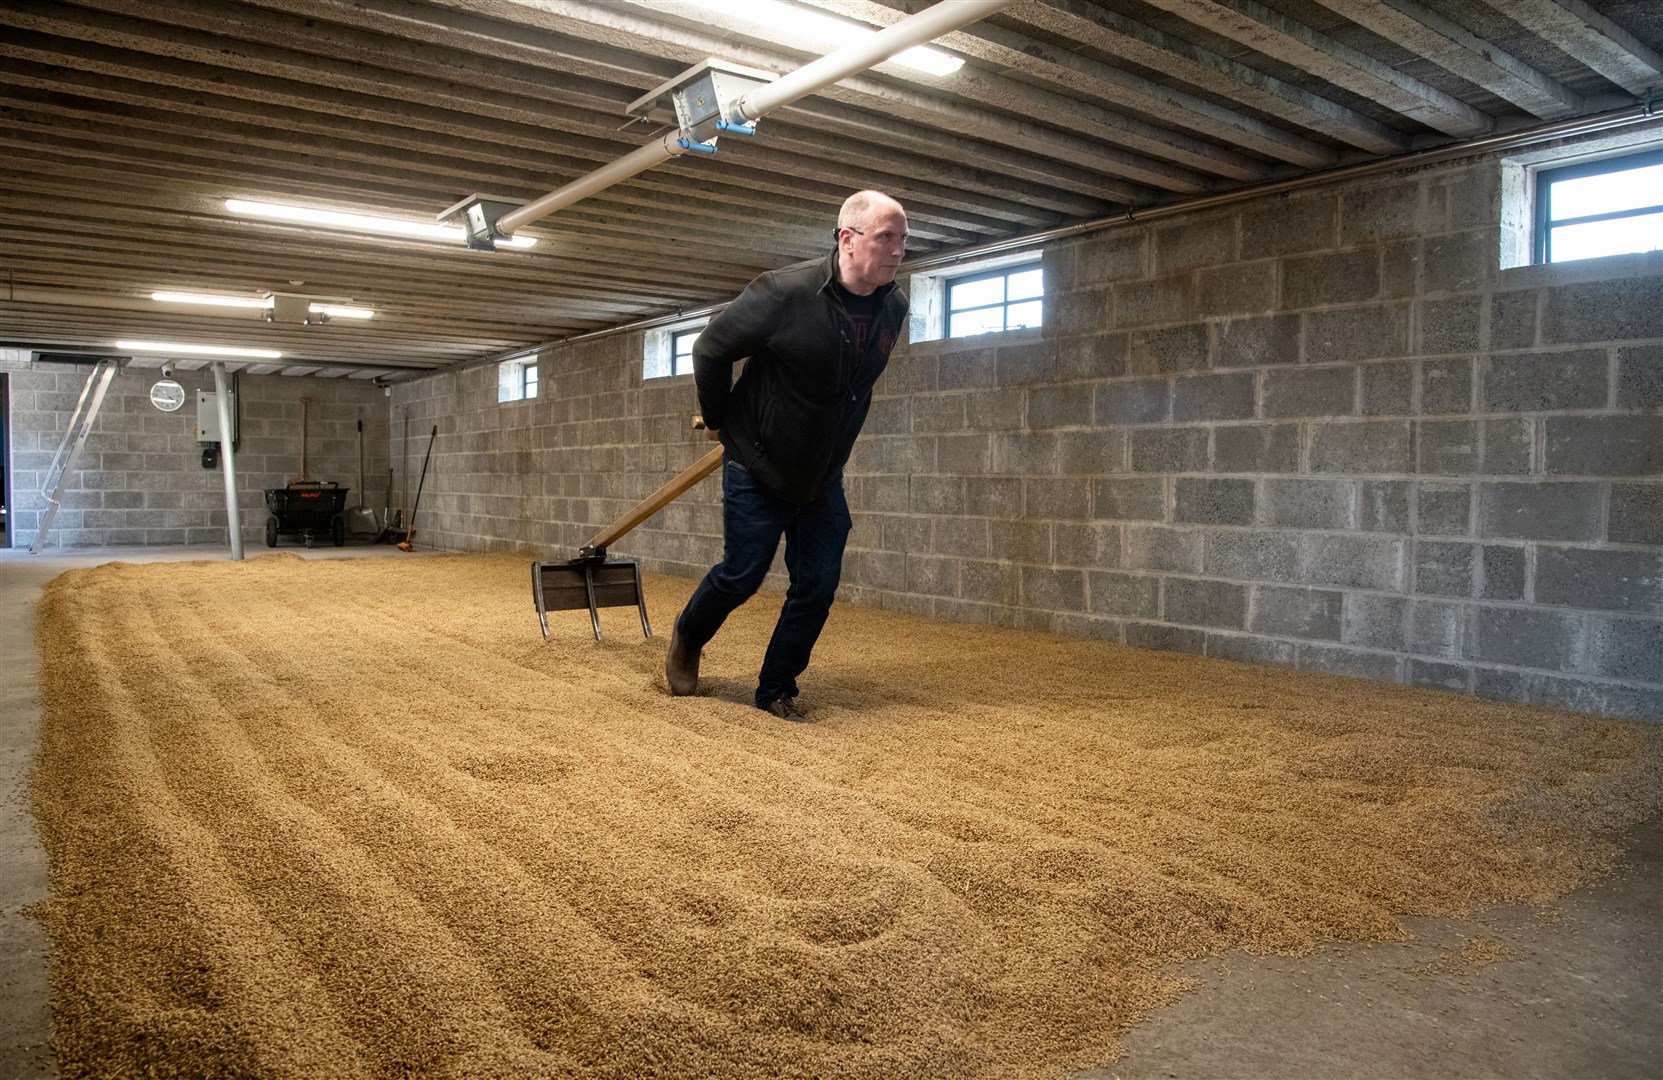 Members of the tour got to try out stages of the whisky making process at Dunphail DistilleryPicture: Daniel Forsyth.